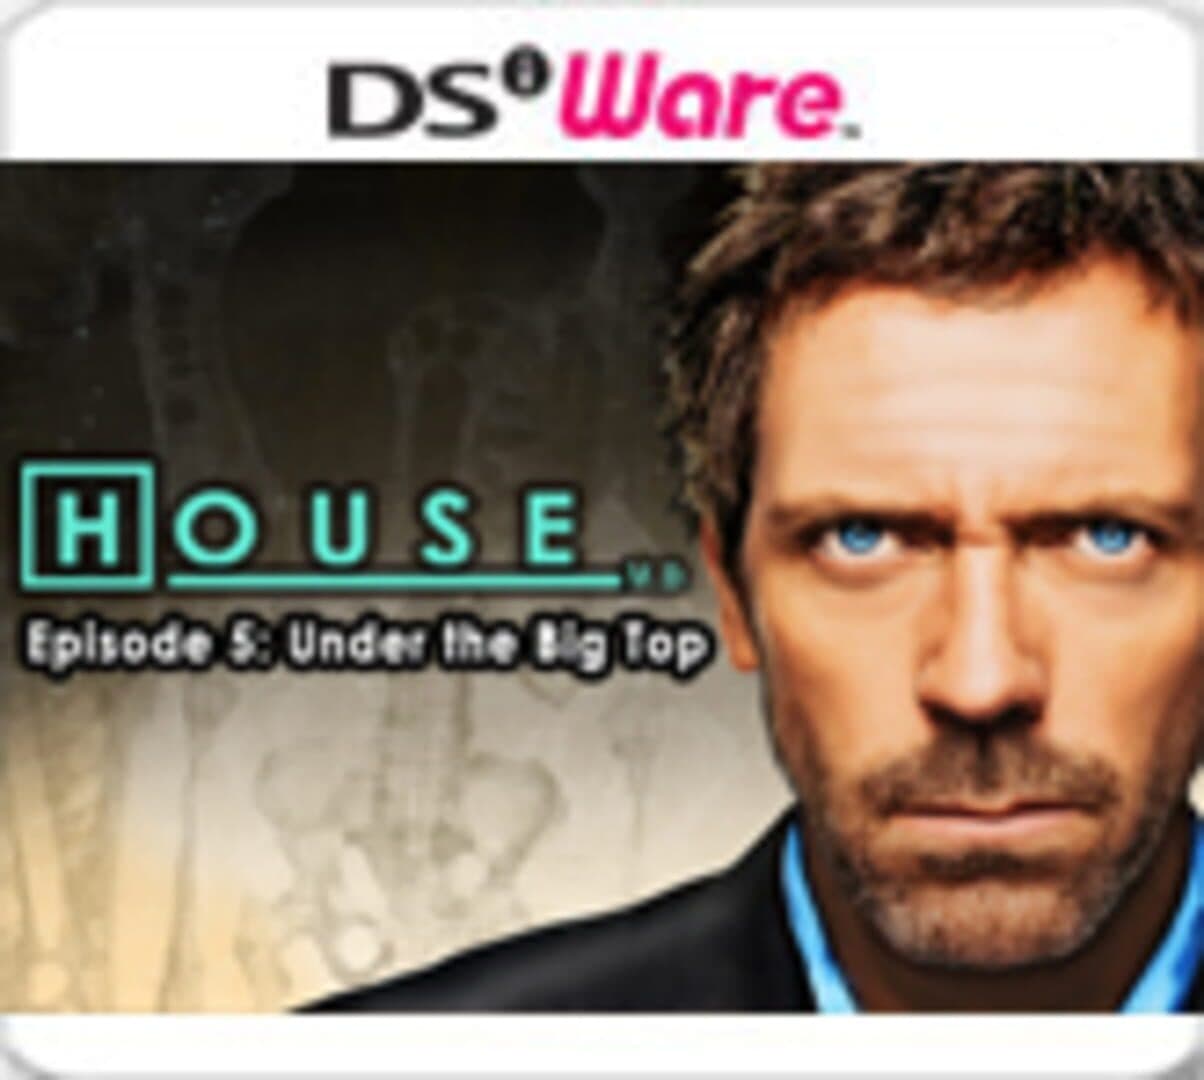 House M.D. Episode 5: Under the Big Top cover art